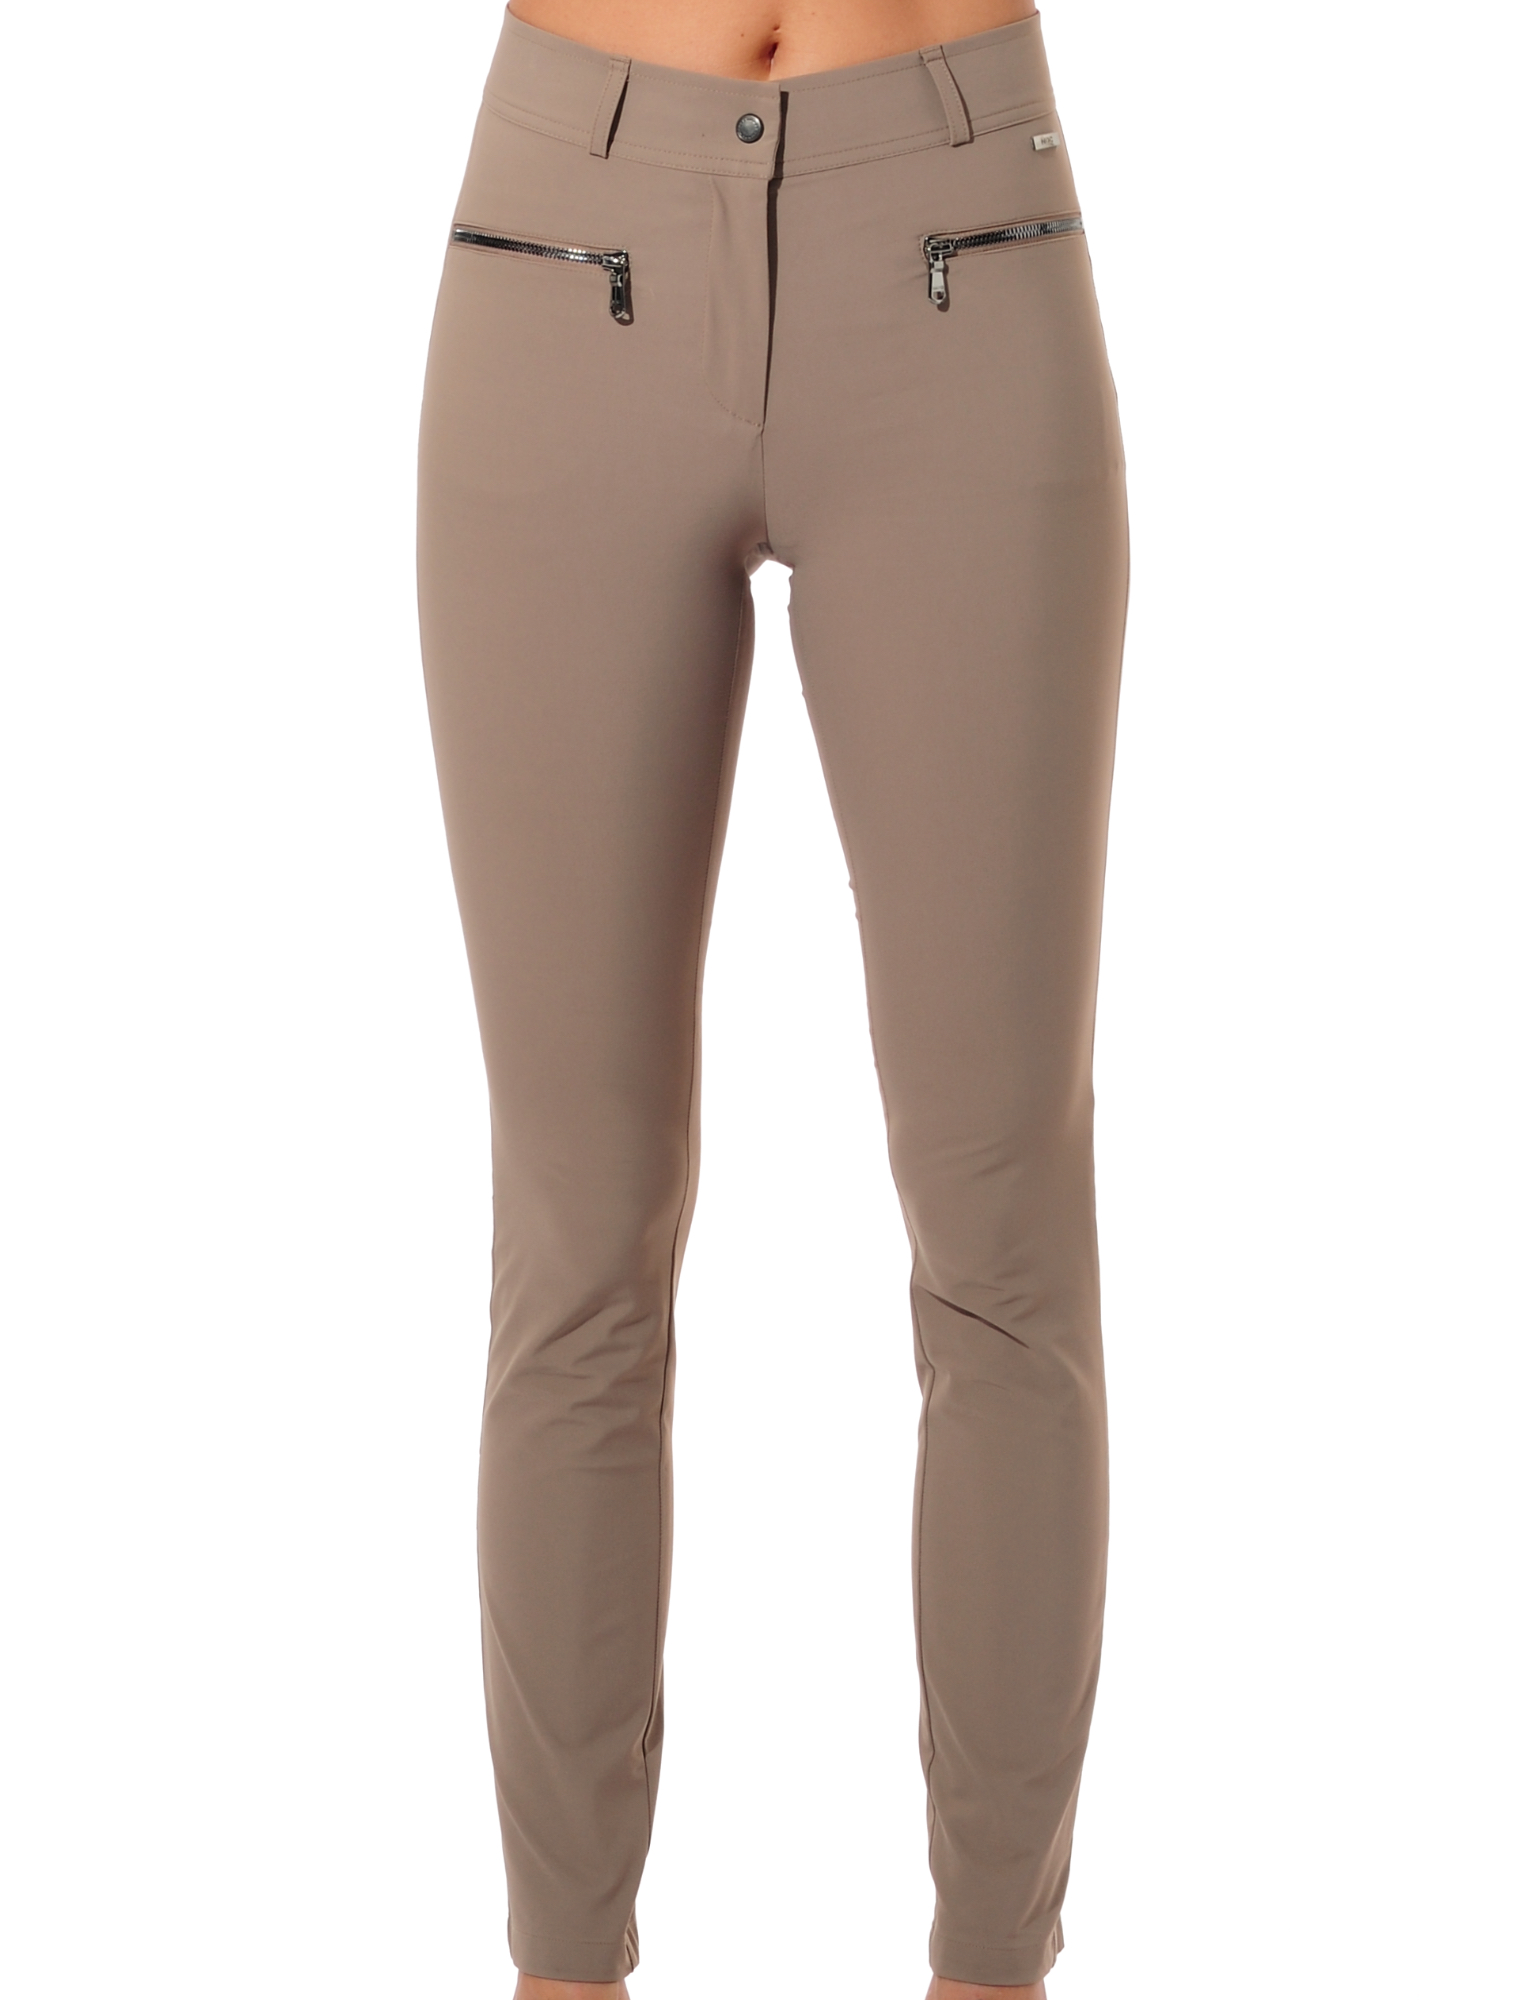 4way stretch jeggings toffee 